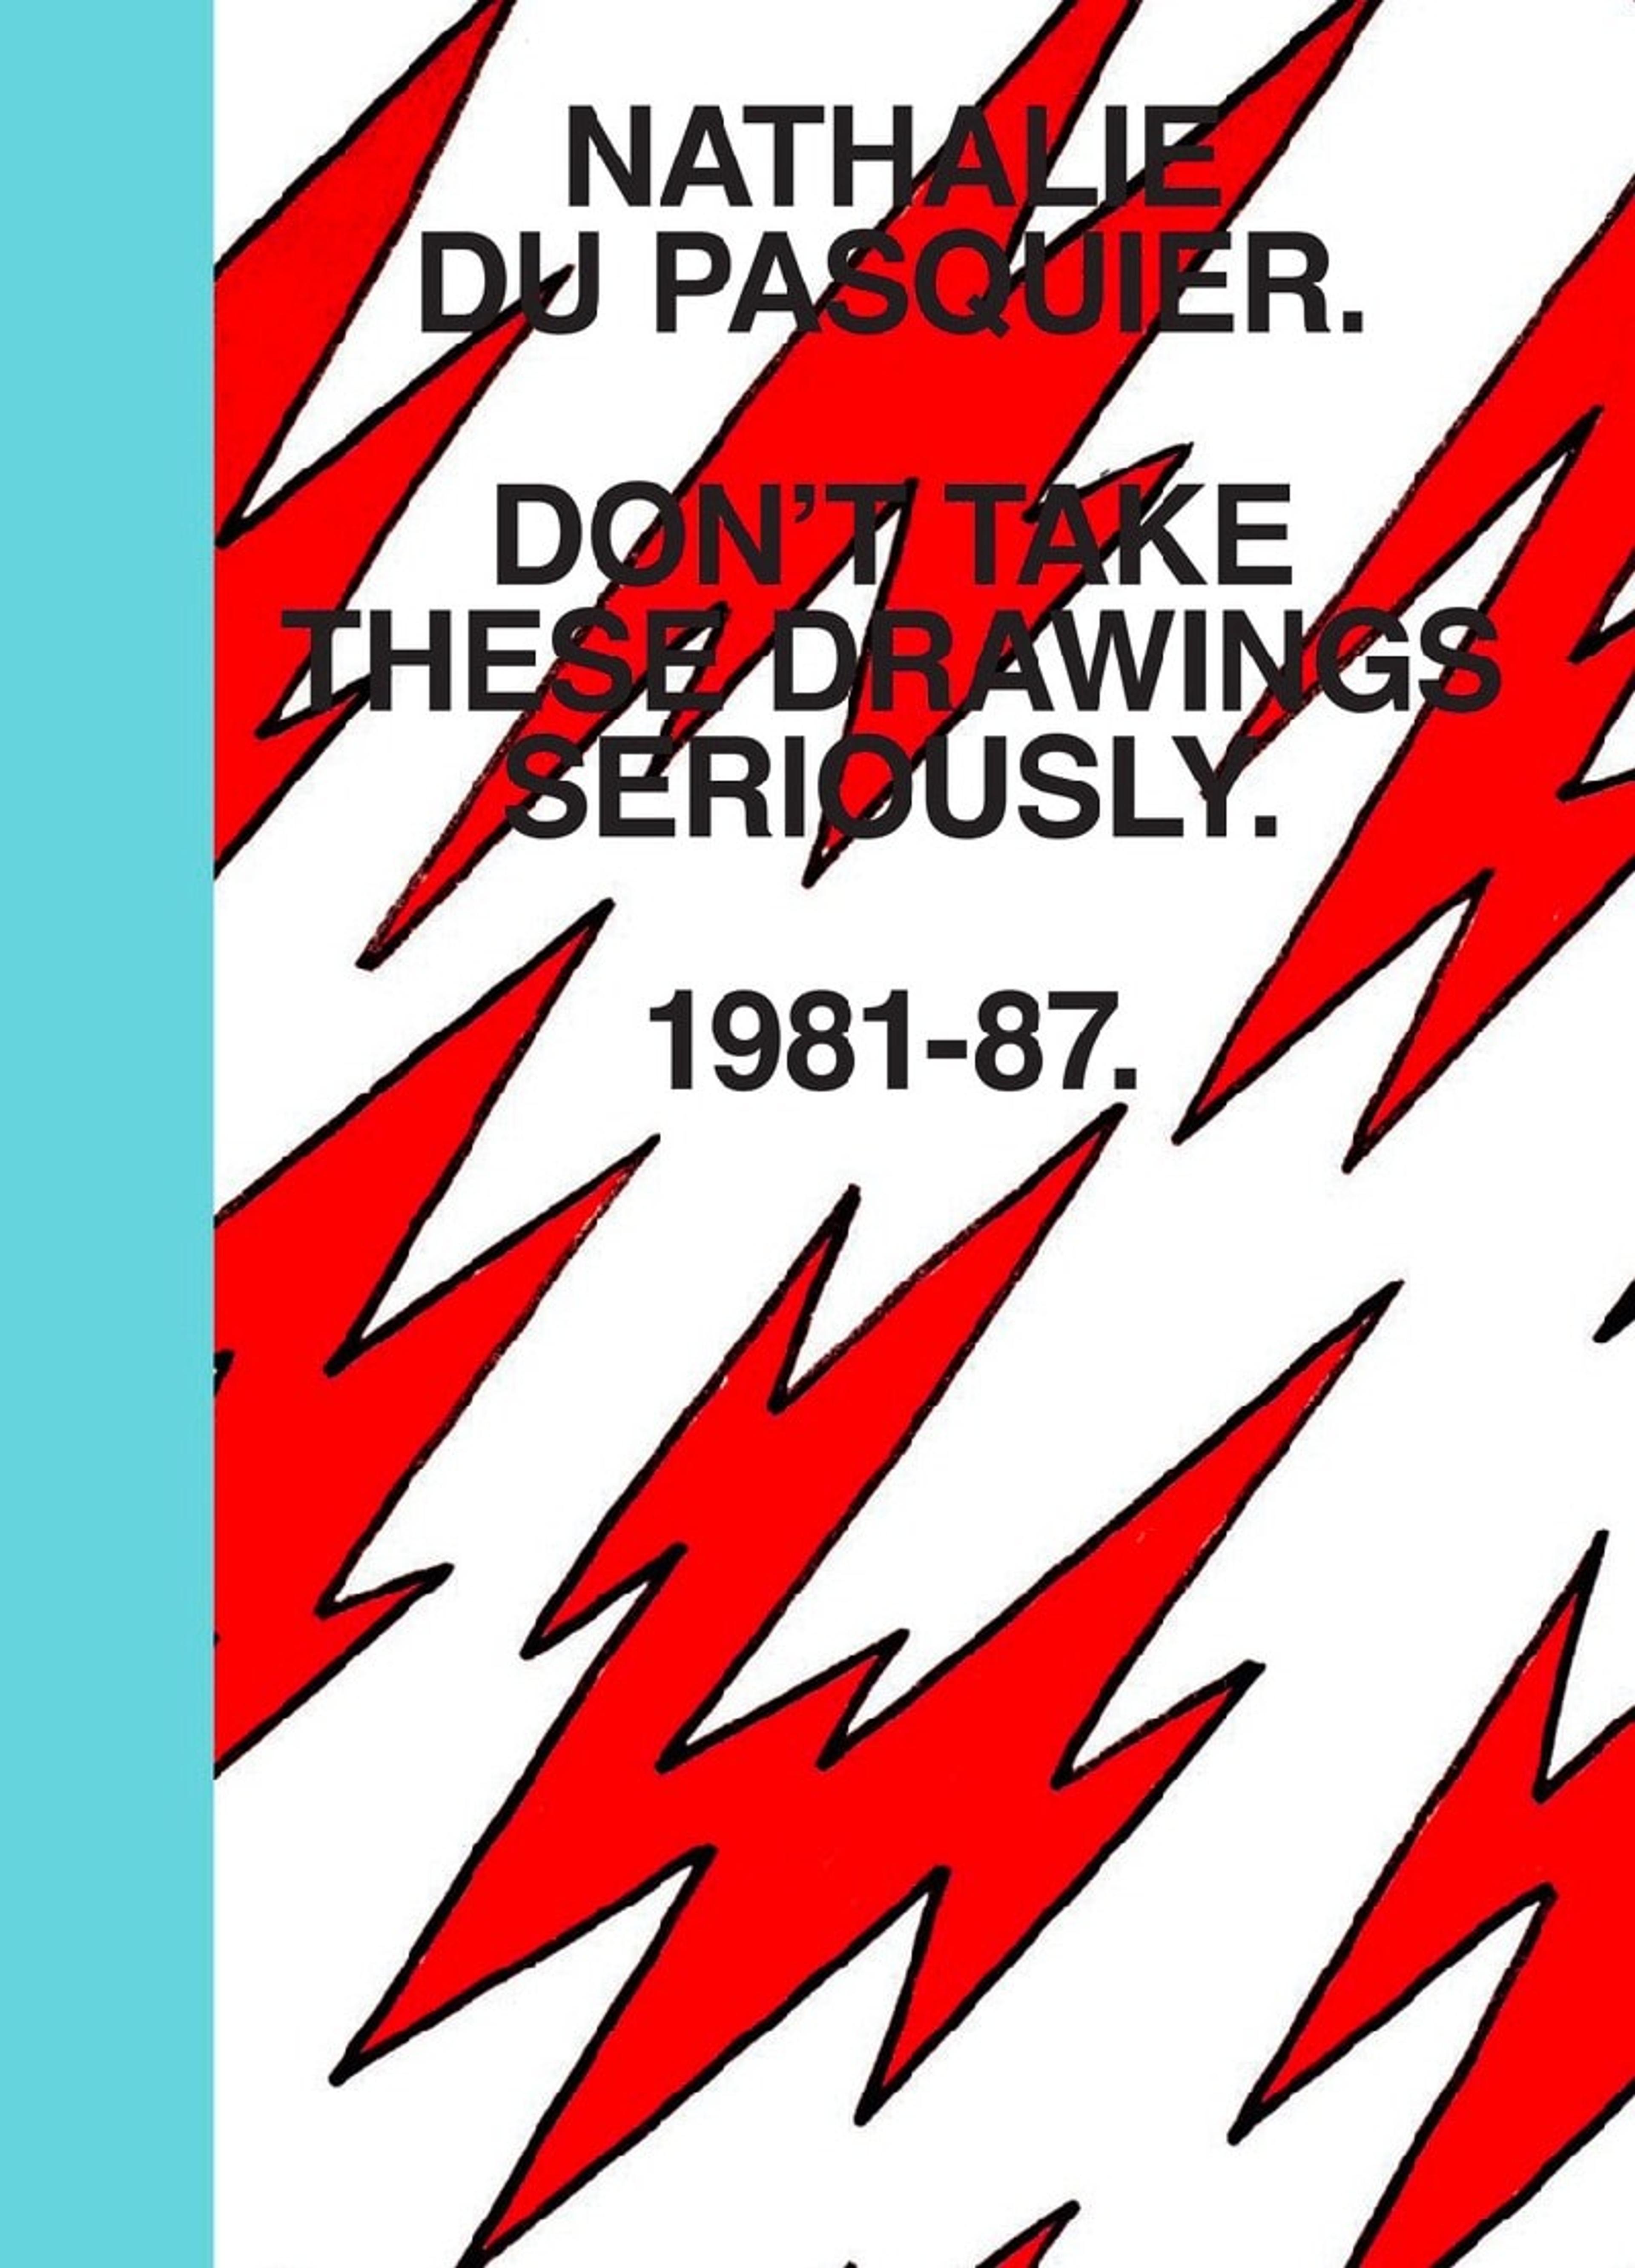 Cover of the book ‘Don't Take These Drawings Seriously’ By Nathalie Du Pasquier. Designed by Omar Sosa